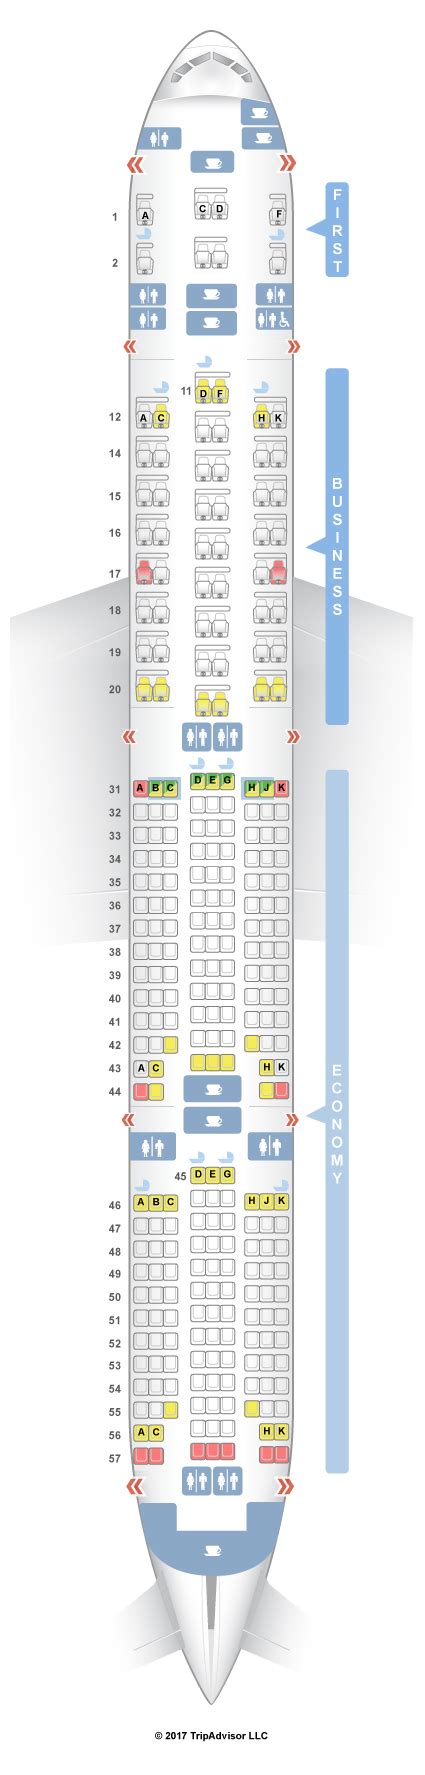 singapore airlines boeing 777 seat map